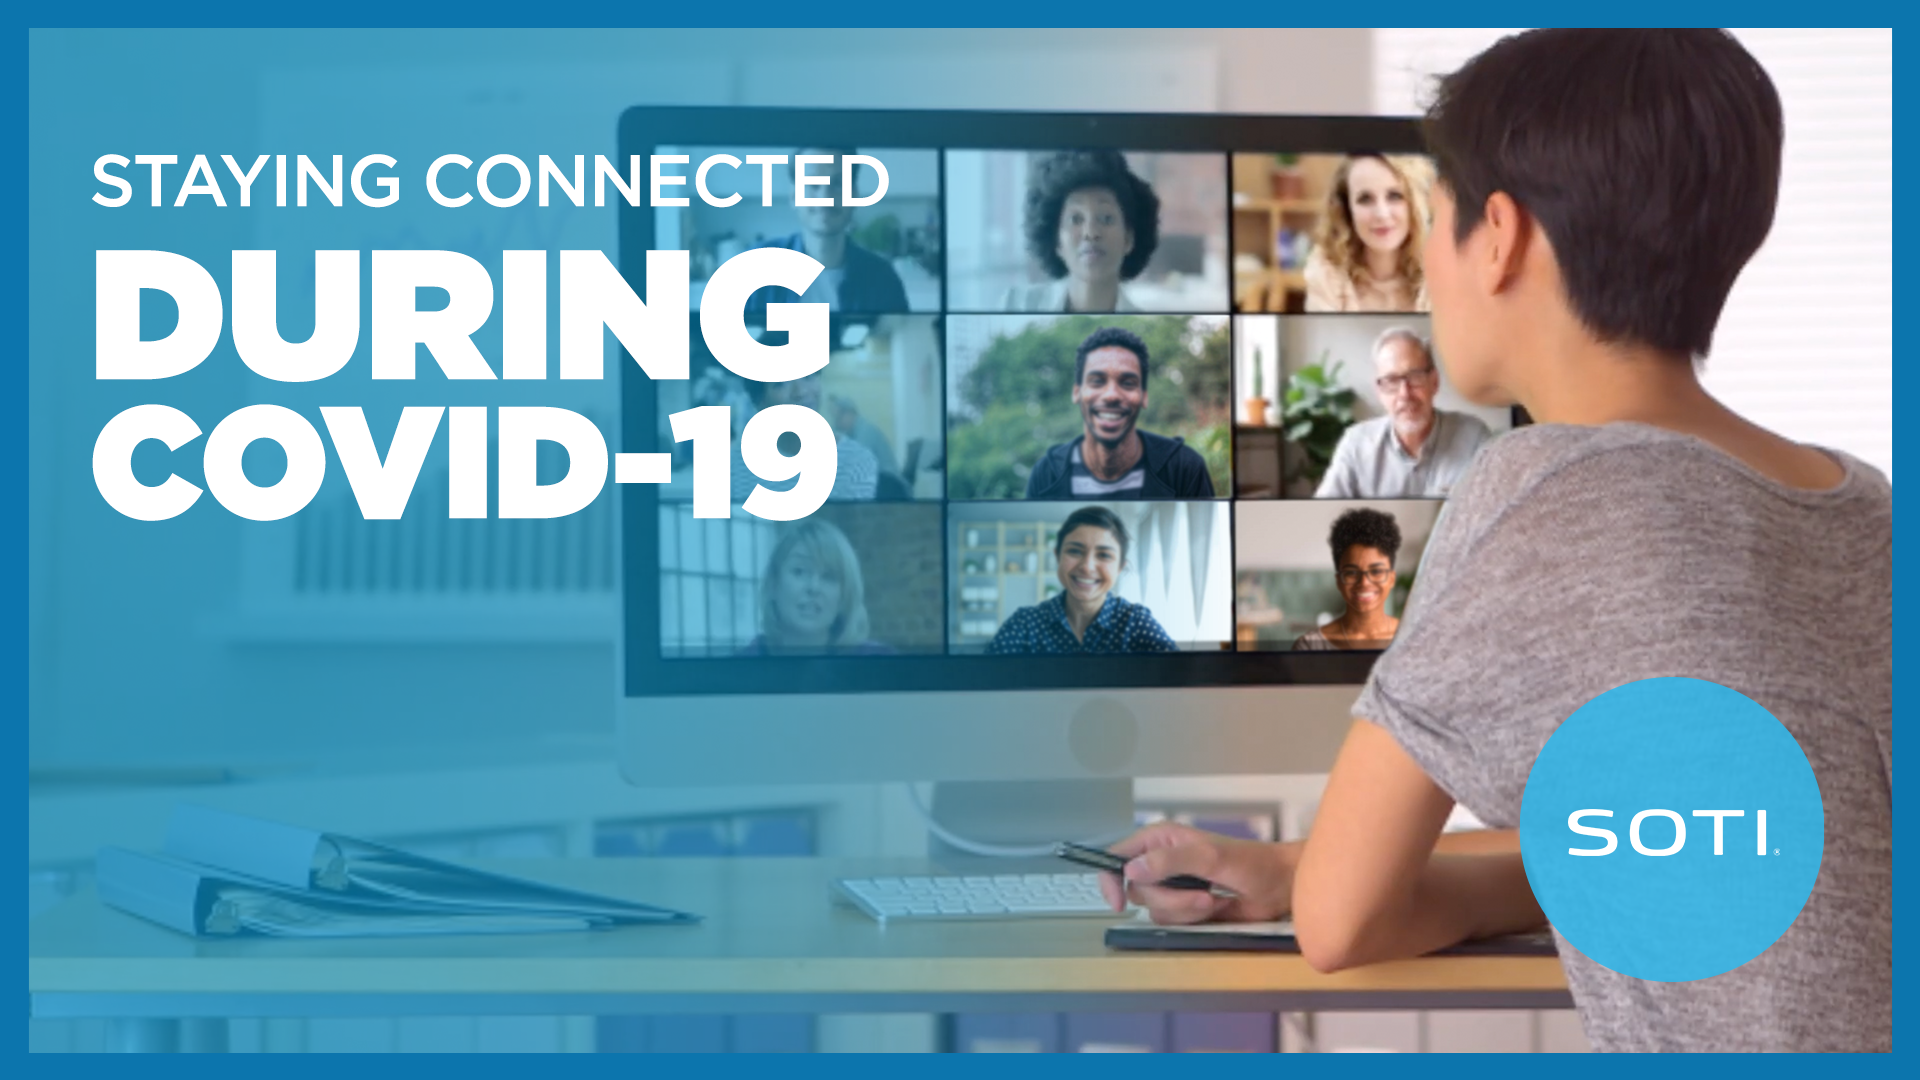 Staying Connected During COVID-19 Video